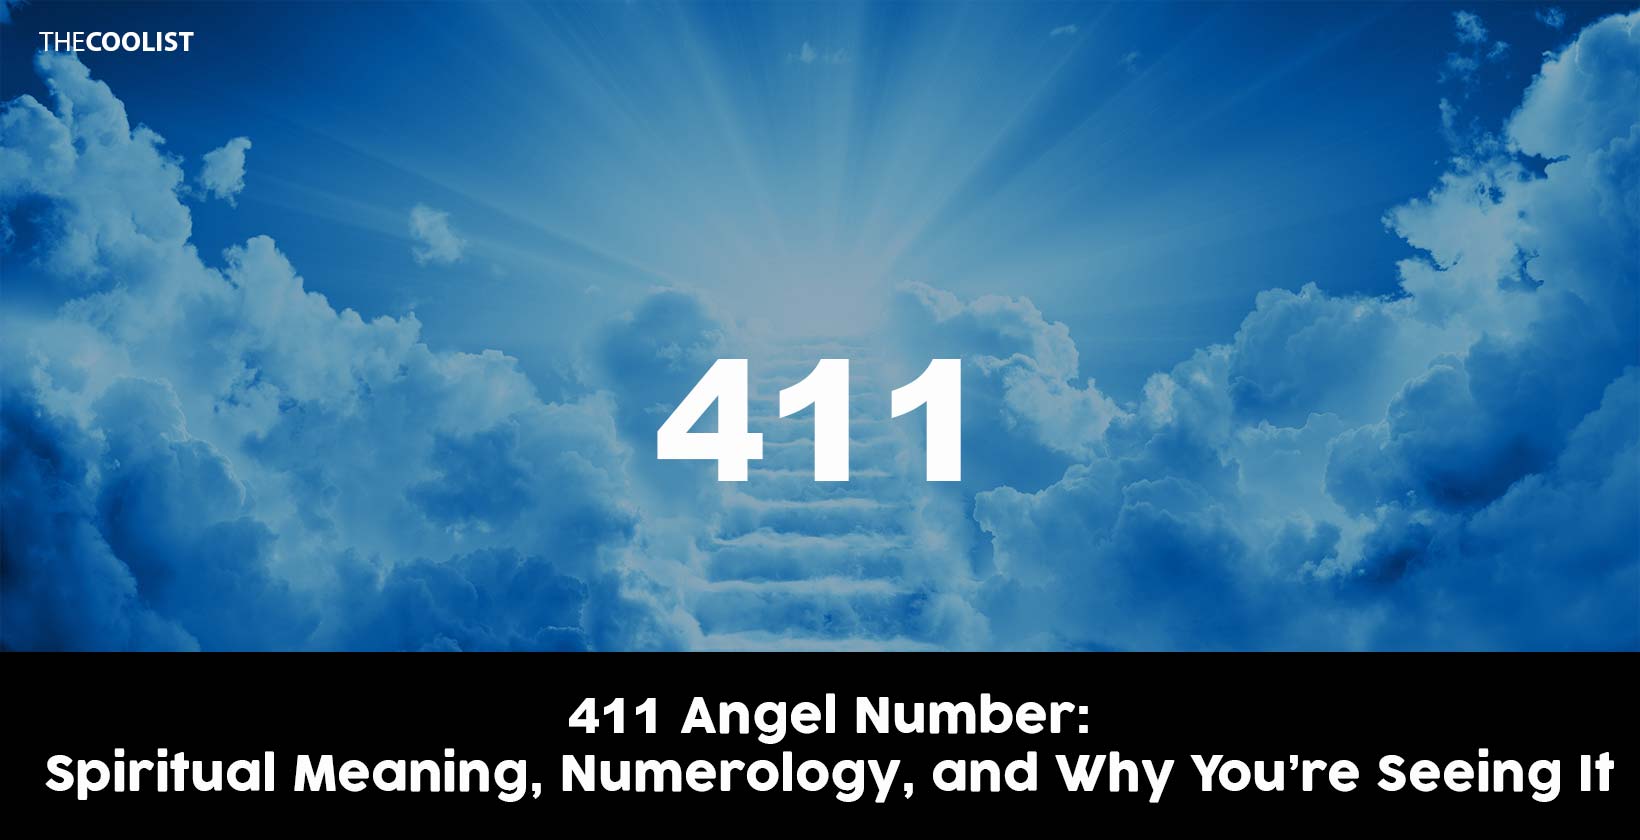 411 Angel Number: Spiritual Meaning, Numerology, and Why You're Seeing It